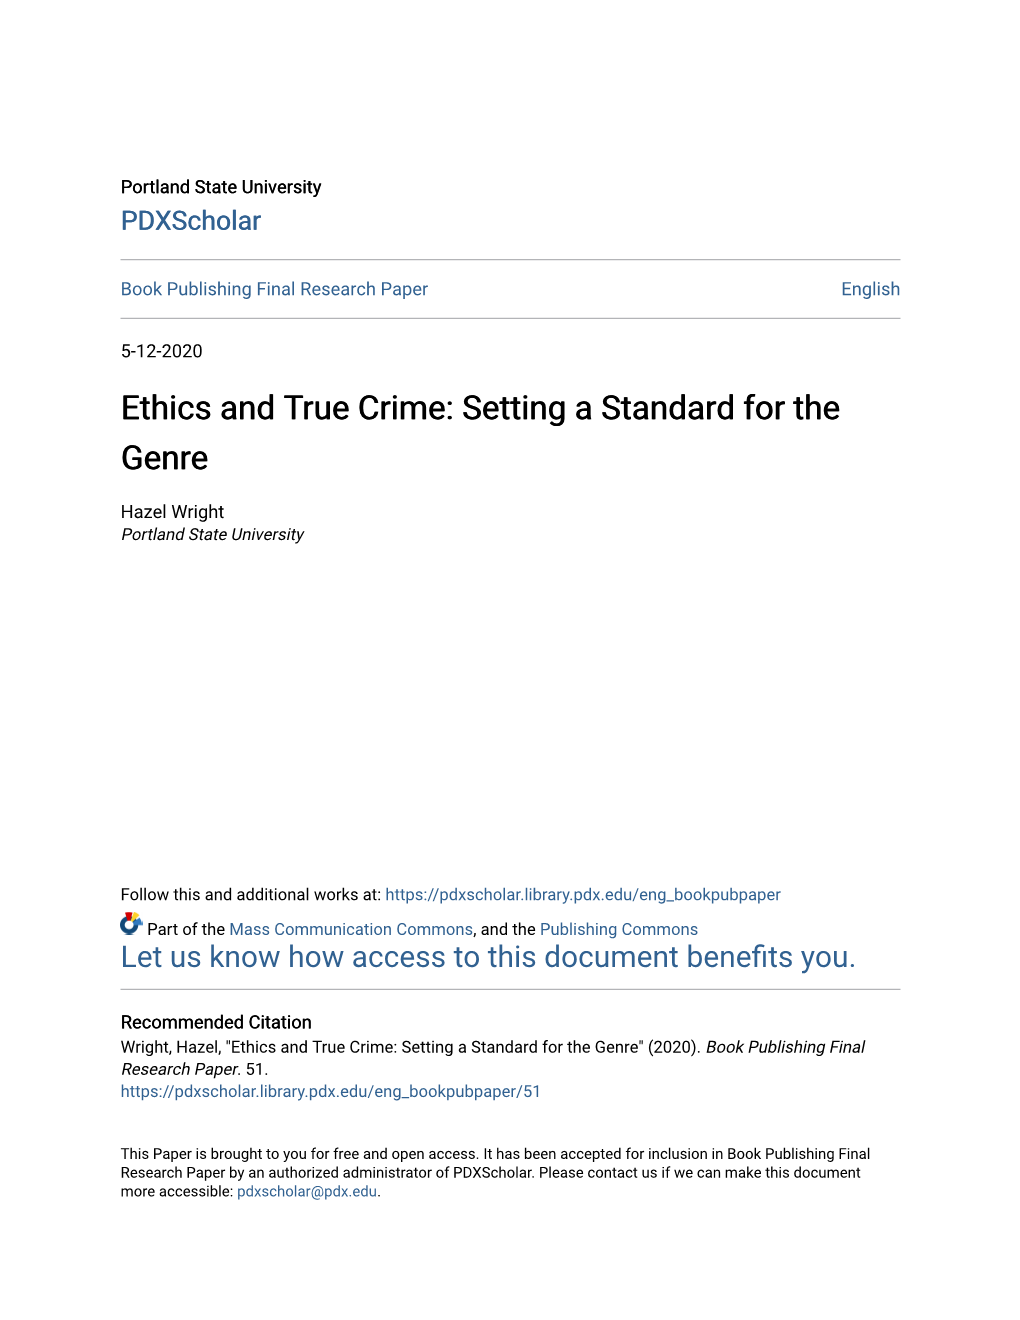 Ethics and True Crime: Setting a Standard for the Genre